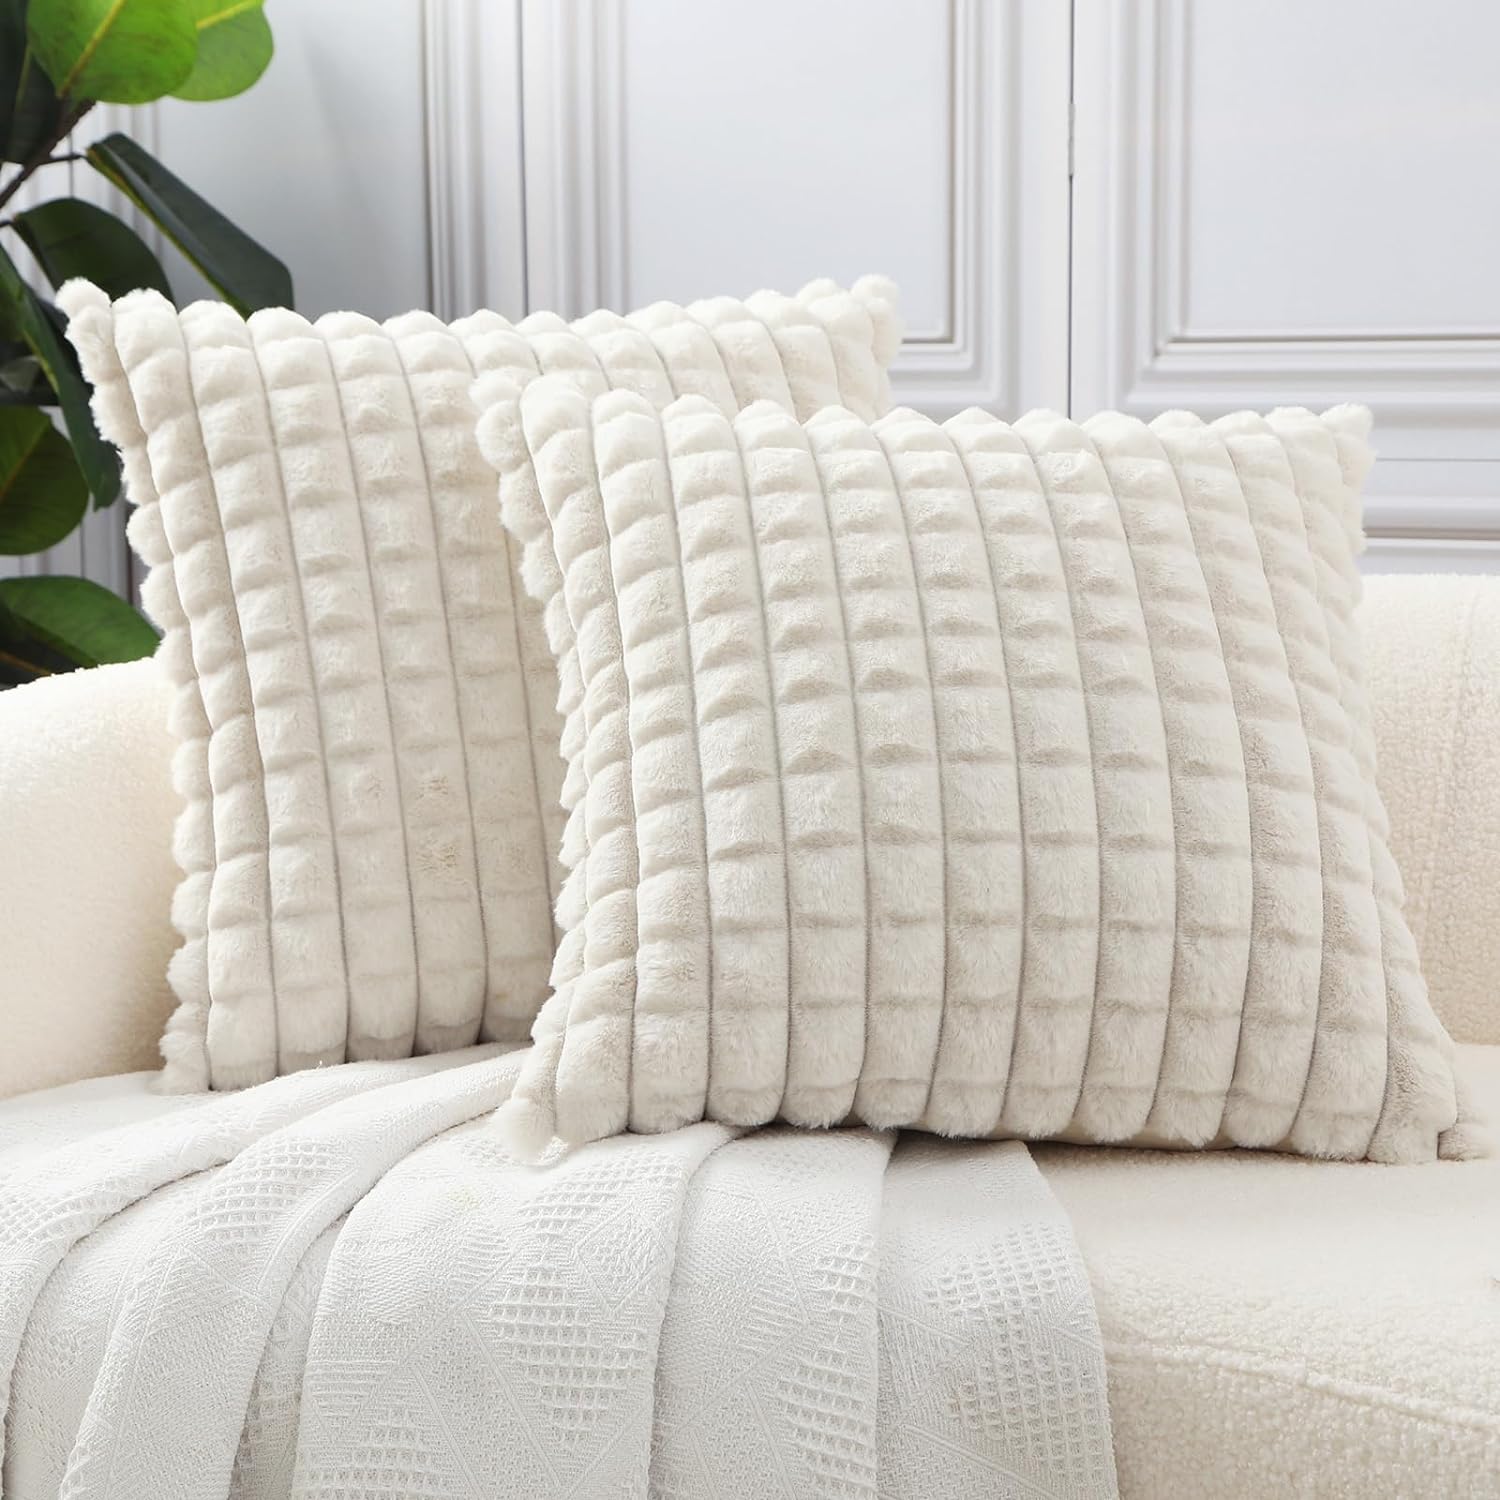 HPUK Faux Fur Plush Square Throw Pillow Covers 18x18 Inch, Decorative Fluffy Couch Pillow Covers for Living Room, Accent Cozy and Fuzzy Pillow Covers for Couch, Sofa, and Bedroom(Cream White)